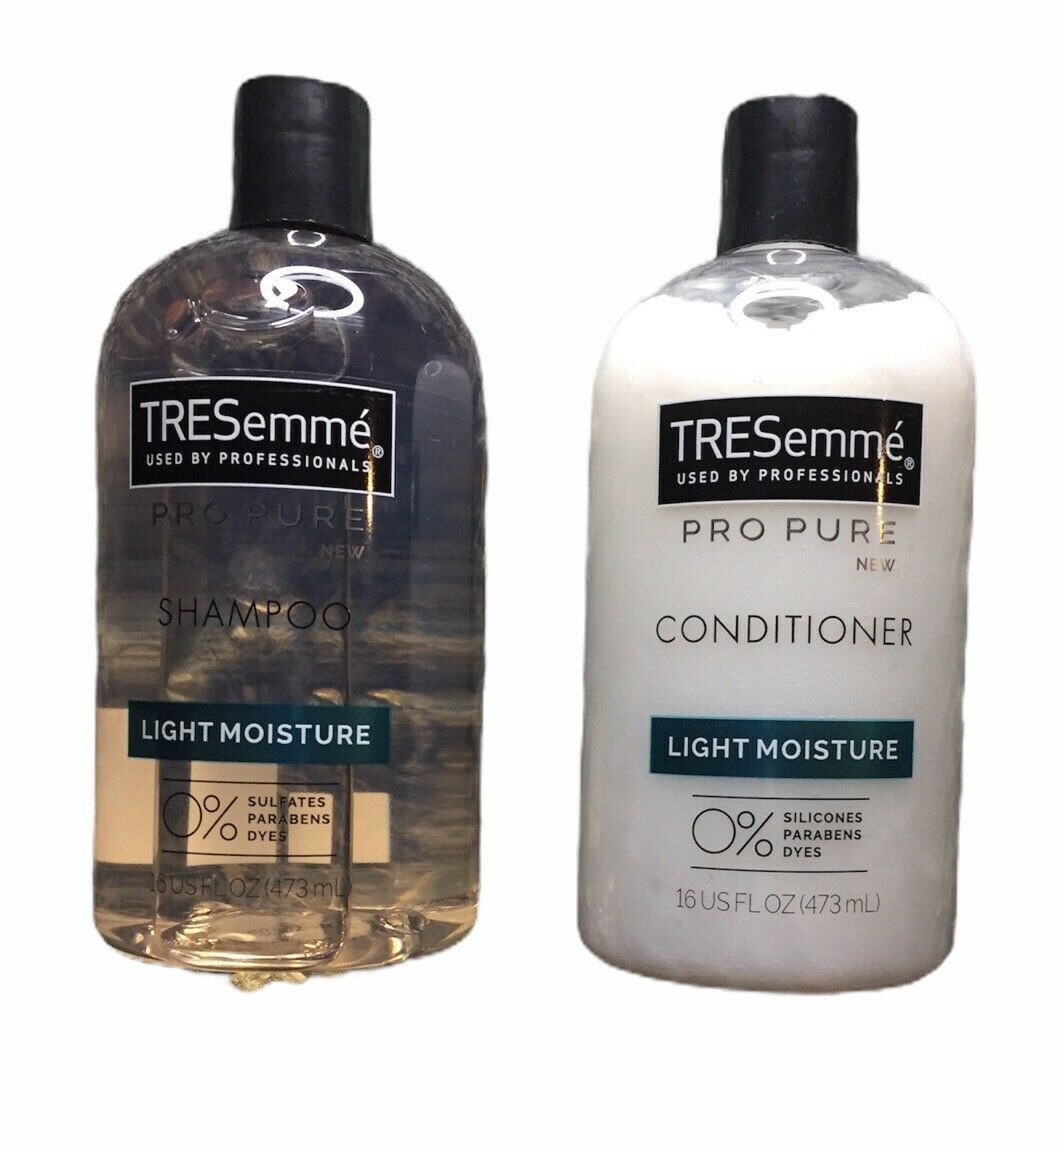 Primary image for TRESemme Pro Pure Light Moisture Shampoo & Conditioner 16oz Bottles *Free Ship